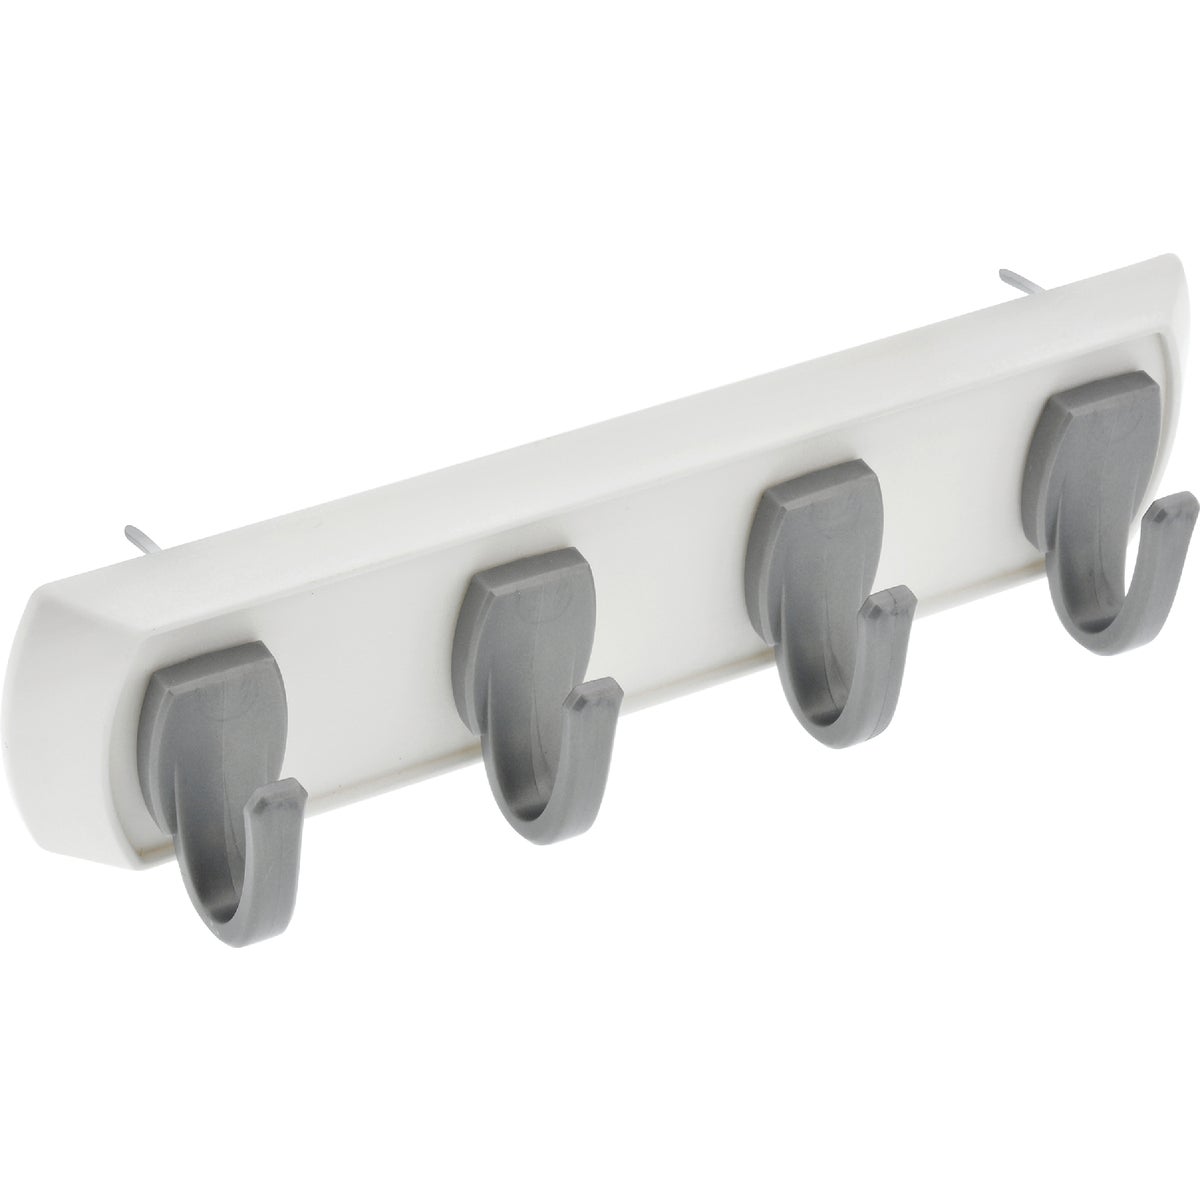 Hillman High and Mighty 5 Lb. Capacity White Key Rail with Silver Hooks